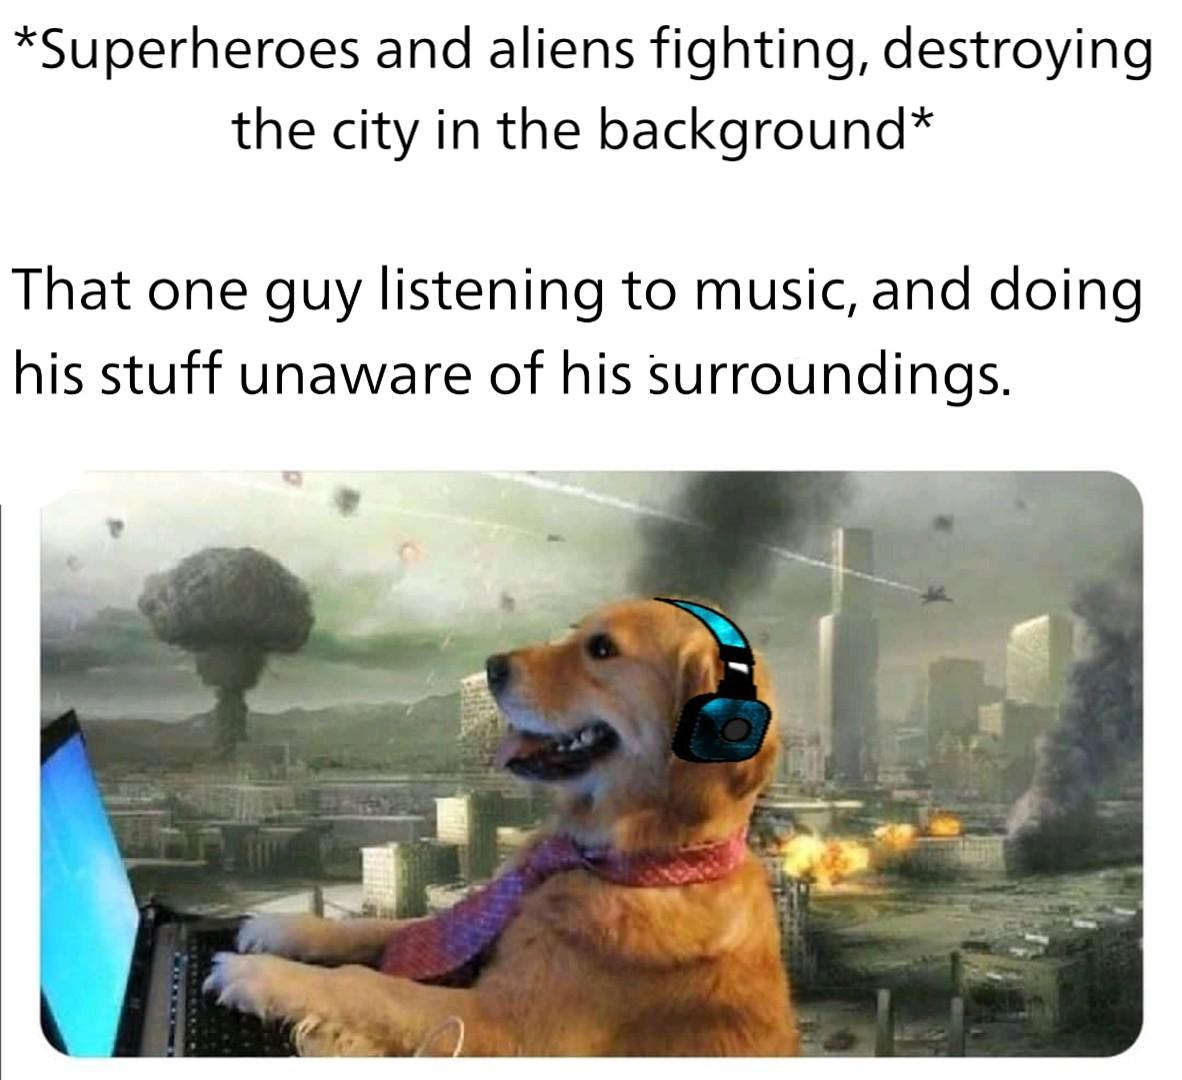 funny memes and pics - applying for jobs in the middle - Superheroes and aliens fighting, destroying the city in the background That one guy listening to music, and doing his stuff unaware of his surroundings.